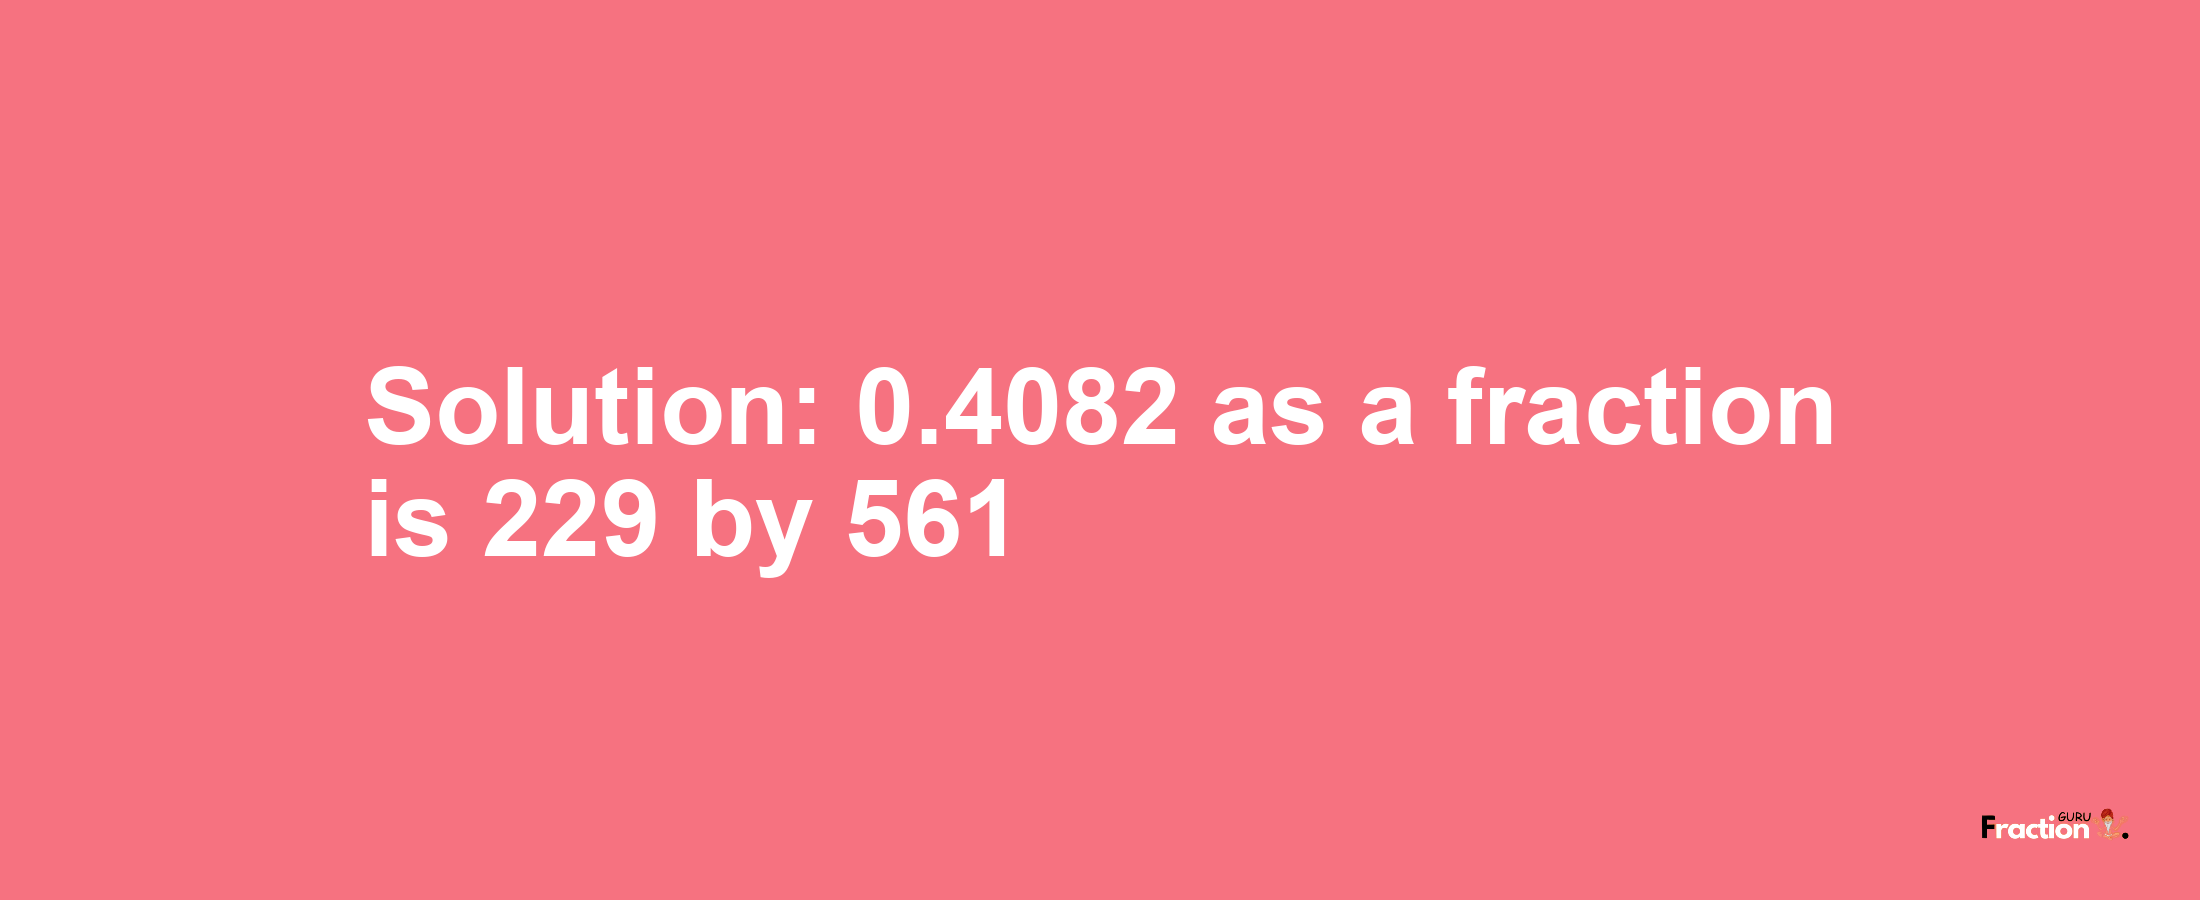 Solution:0.4082 as a fraction is 229/561